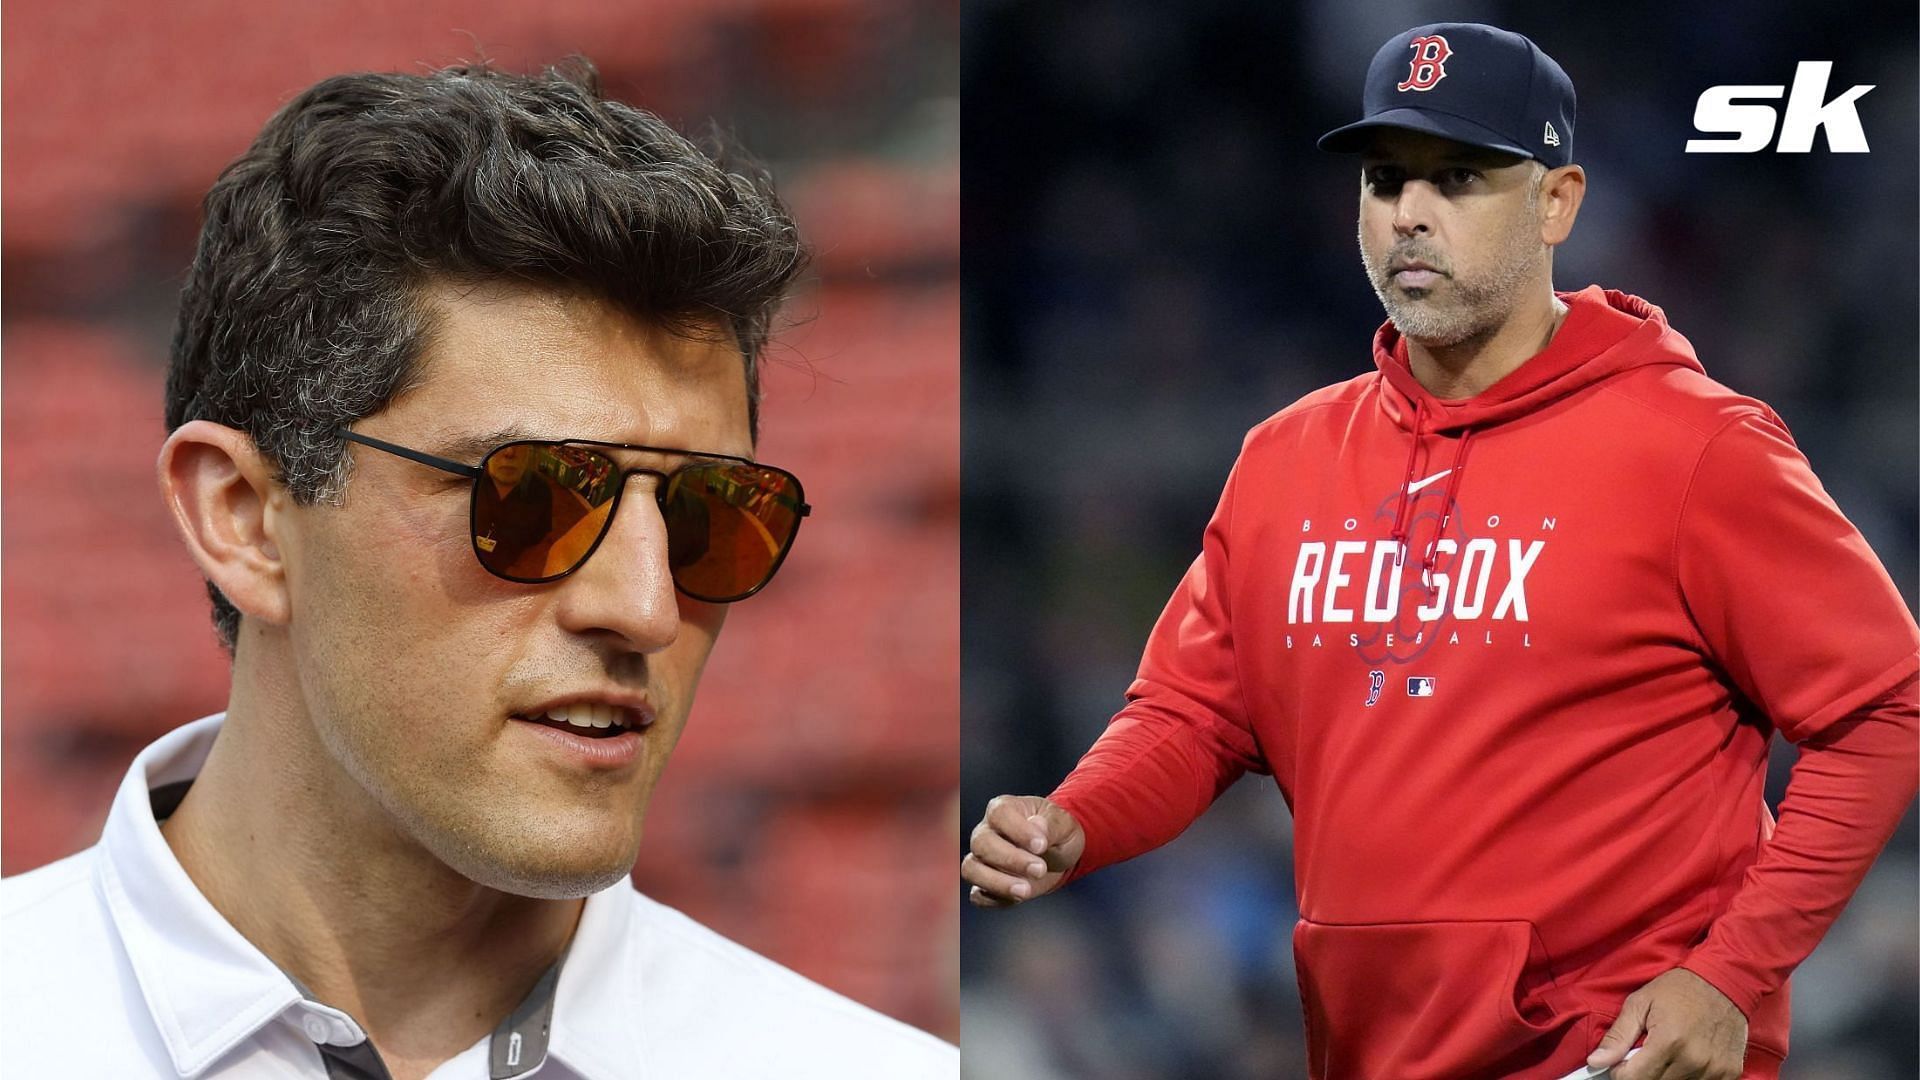 Sources close to Chaim Bloom believe that he did not receive sufficient support from Red Sox manager Alex Cora